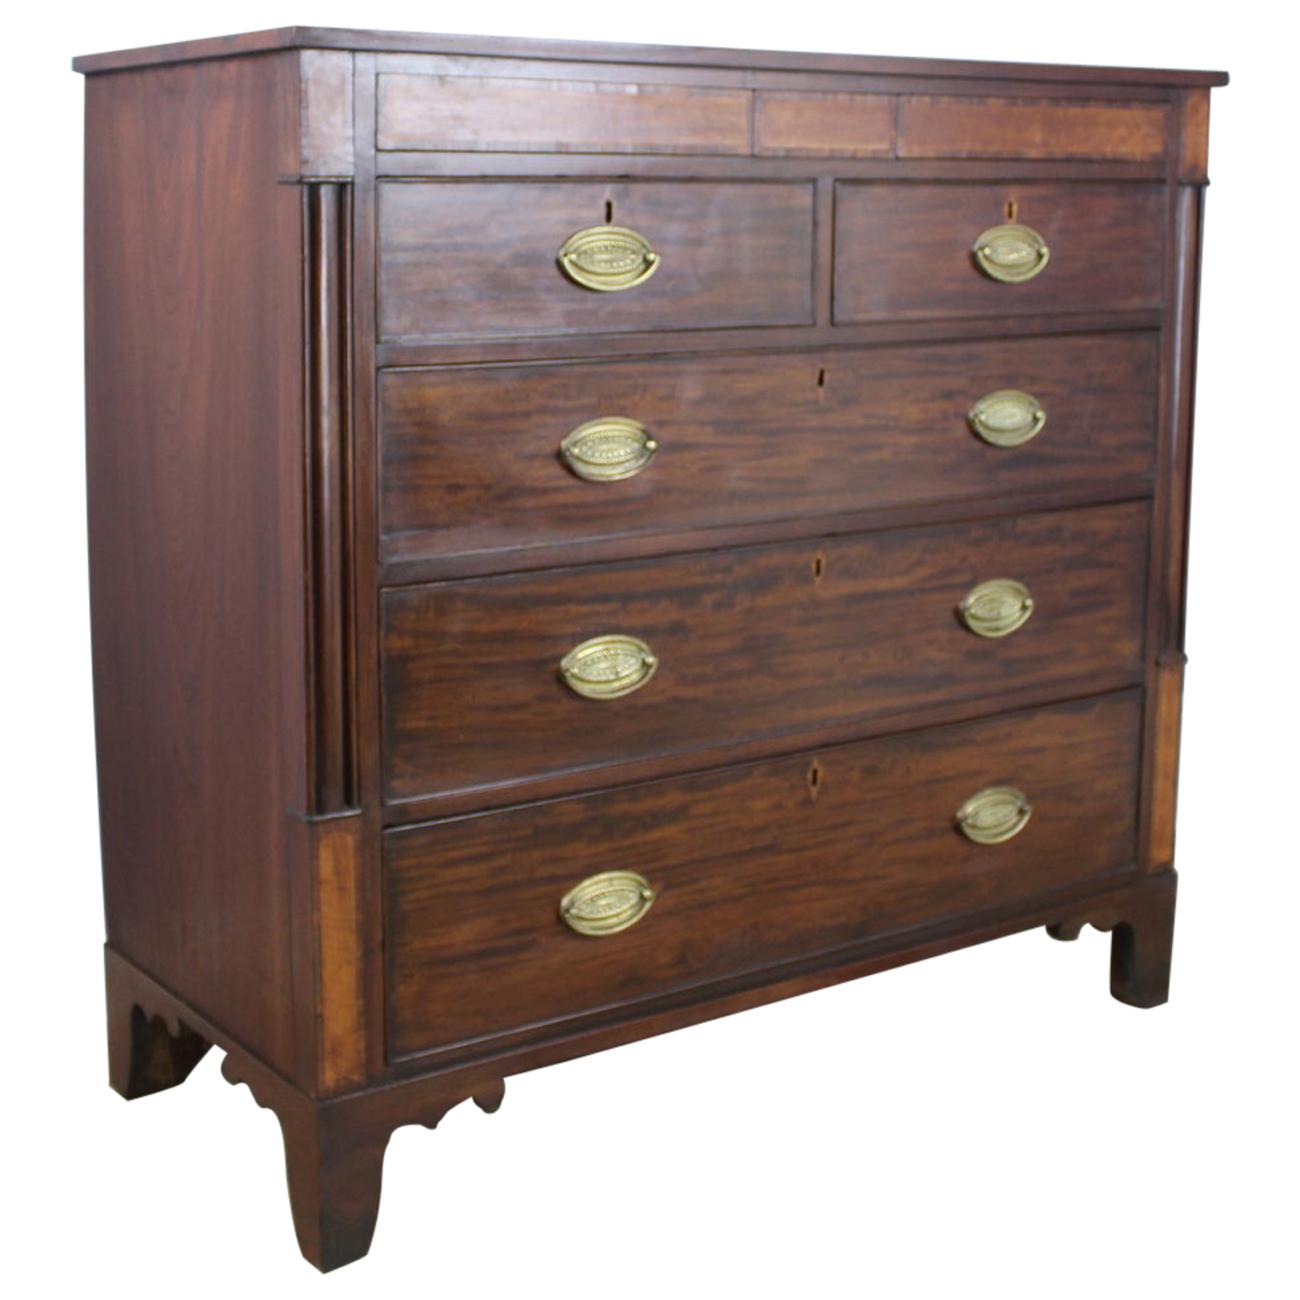 Early Mahogany Chest of Drawers, Satinwood Inlay, Secret Drawers on Top Frieze